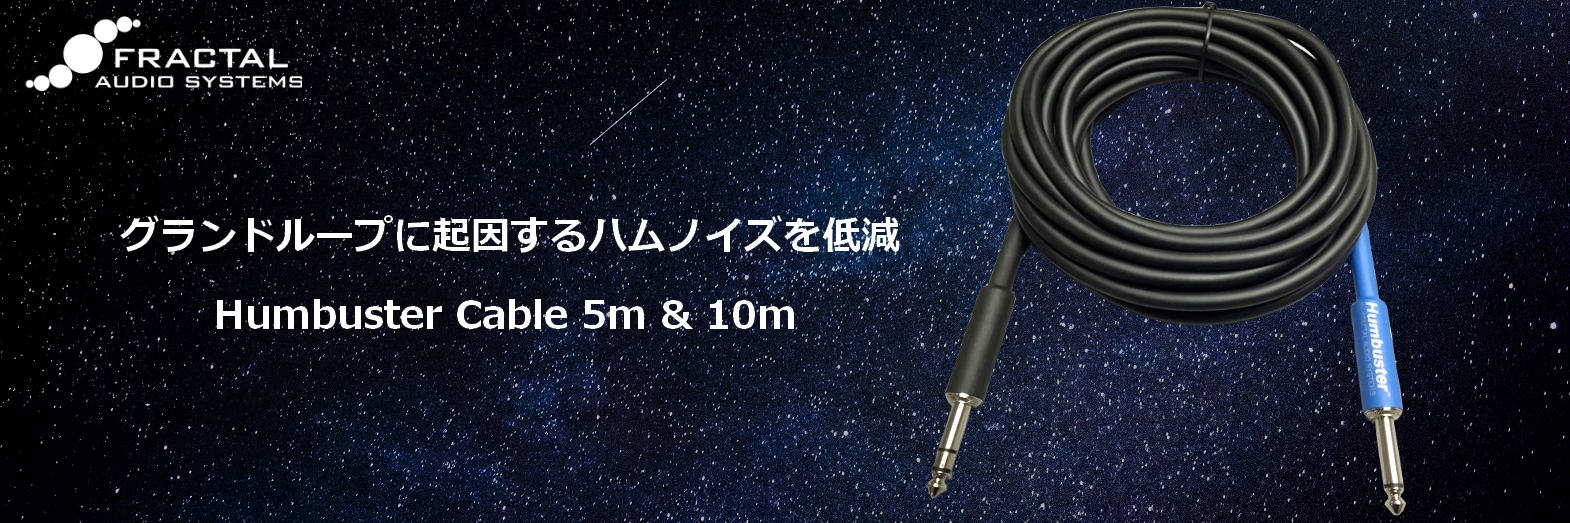 Fractal Audio Axe-Fx対応Humbuster Cable